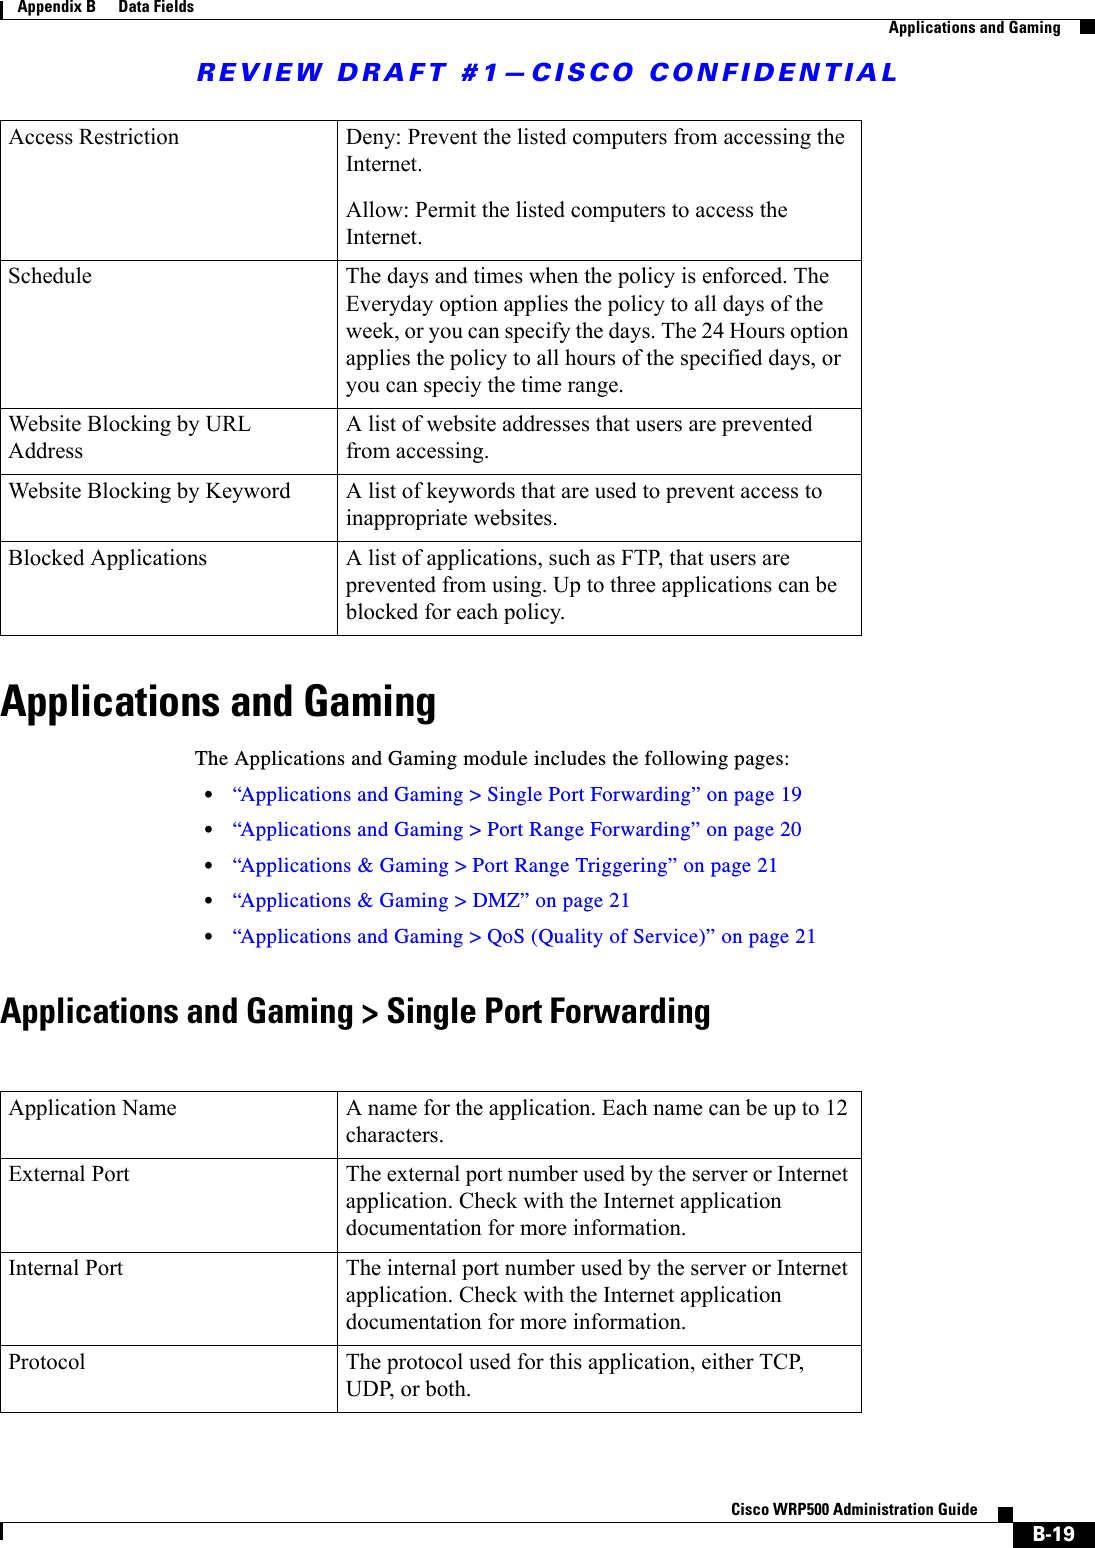 REVIEW DRAFT #1—CISCO CONFIDENTIALB-19Cisco WRP500 Administration Guide Appendix B      Data Fields  Applications and GamingApplications and GamingThe Applications and Gaming module includes the following pages:•“Applications and Gaming &gt; Single Port Forwarding” on page 19•“Applications and Gaming &gt; Port Range Forwarding” on page 20•“Applications &amp; Gaming &gt; Port Range Triggering” on page 21•“Applications &amp; Gaming &gt; DMZ” on page 21•“Applications and Gaming &gt; QoS (Quality of Service)” on page 21Applications and Gaming &gt; Single Port ForwardingAccess Restriction Deny: Prevent the listed computers from accessing the Internet.Allow: Permit the listed computers to access the Internet.Schedule The days and times when the policy is enforced. The Everyday option applies the policy to all days of the week, or you can specify the days. The 24 Hours option applies the policy to all hours of the specified days, or you can speciy the time range.Website Blocking by URL AddressA list of website addresses that users are prevented from accessing.Website Blocking by Keyword A list of keywords that are used to prevent access to inappropriate websites.Blocked Applications A list of applications, such as FTP, that users are prevented from using. Up to three applications can be blocked for each policy.Application Name A name for the application. Each name can be up to 12 characters.External Port The external port number used by the server or Internet application. Check with the Internet application documentation for more information.Internal Port The internal port number used by the server or Internet application. Check with the Internet application documentation for more information.Protocol The protocol used for this application, either TCP, UDP, or both.